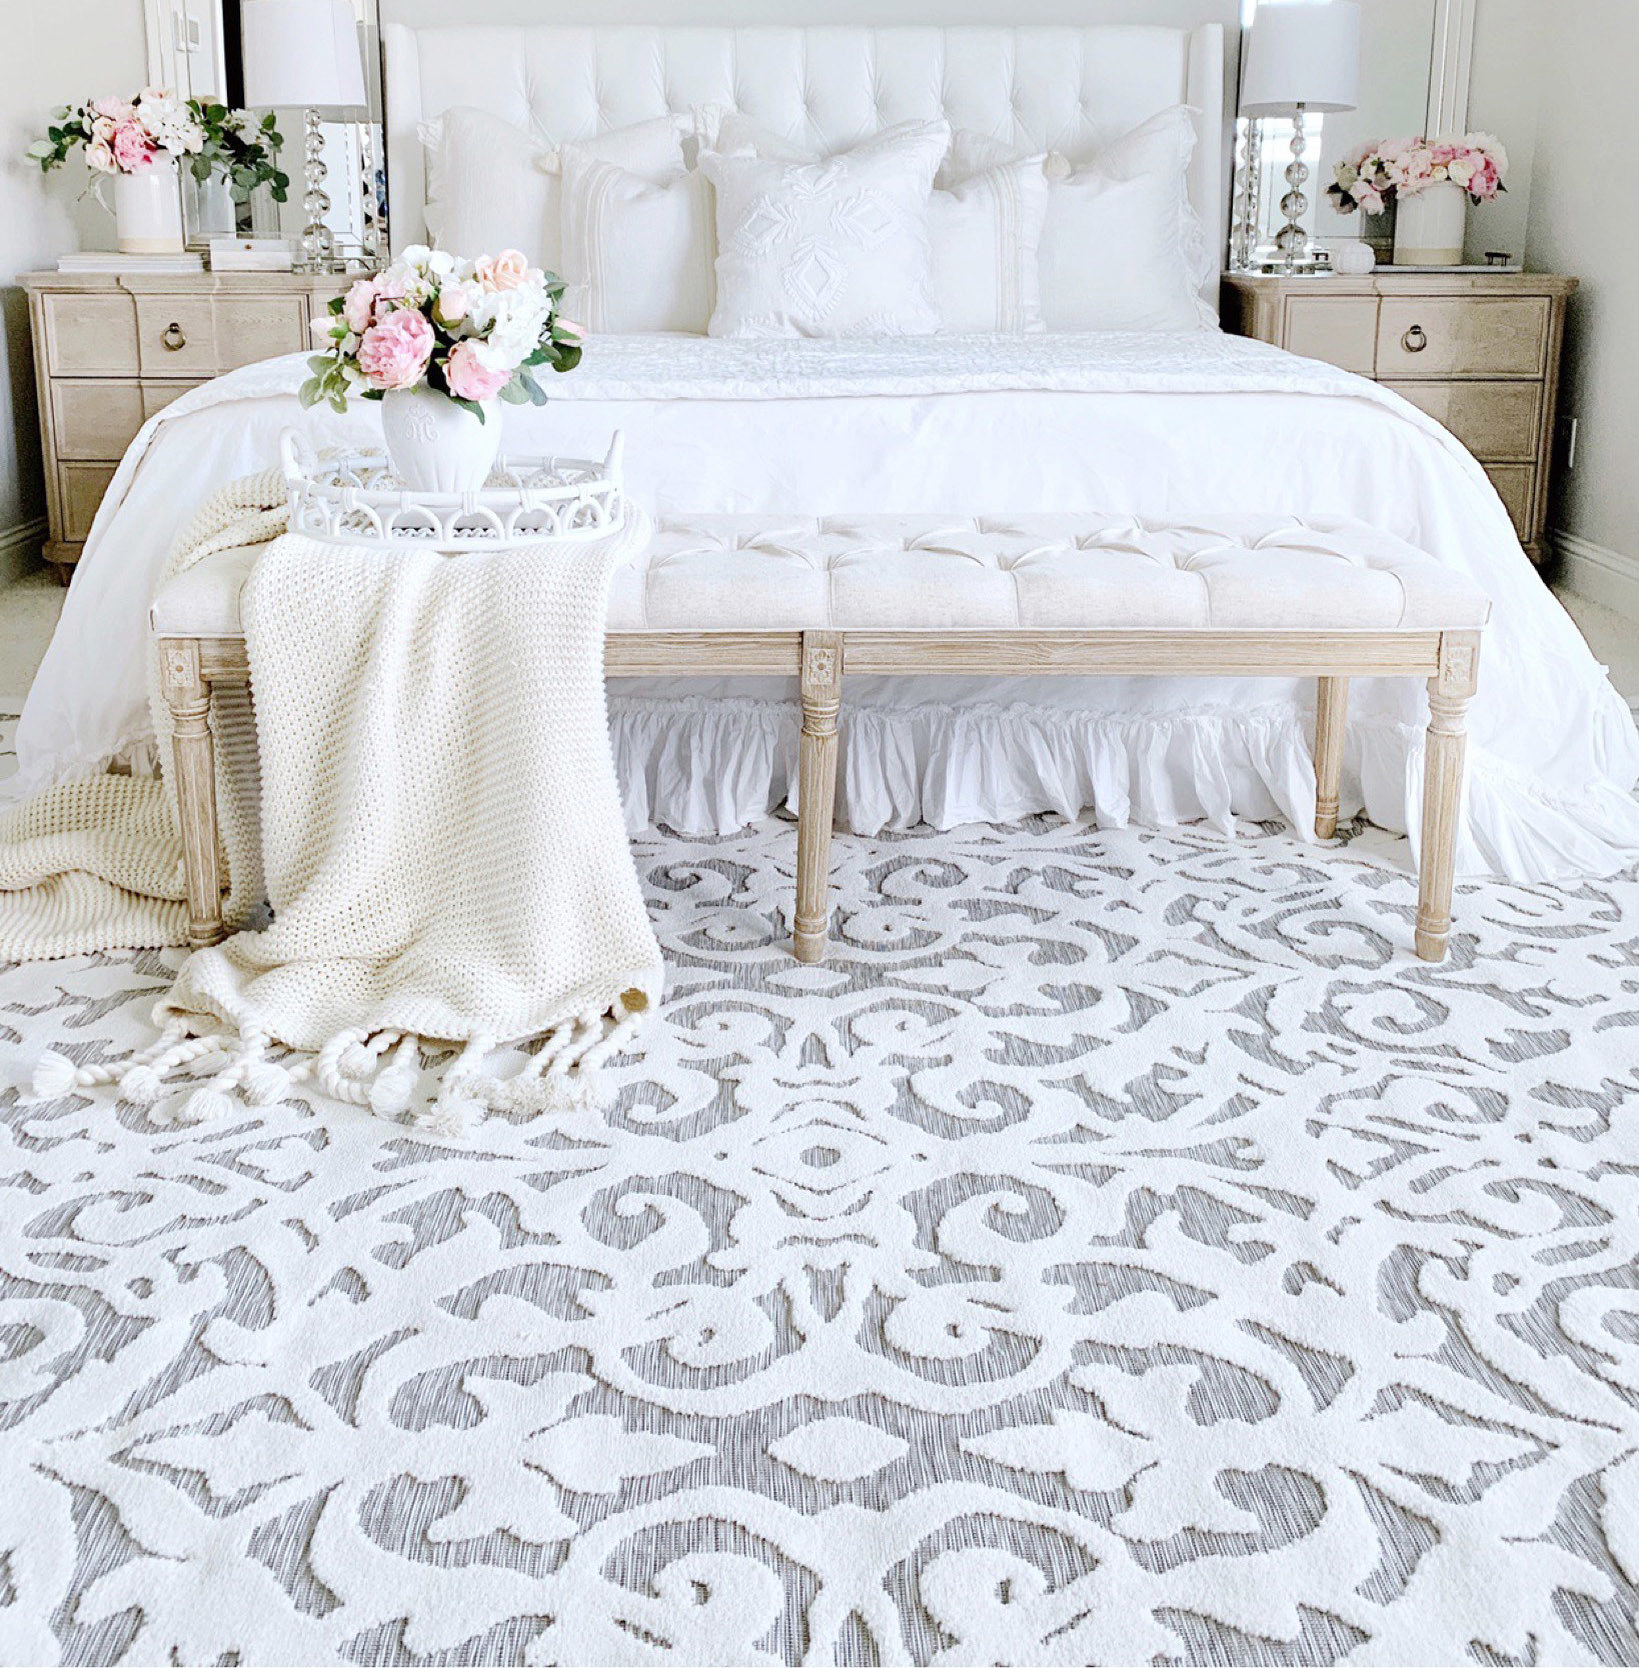 A white pattern carpet in a white bedroom